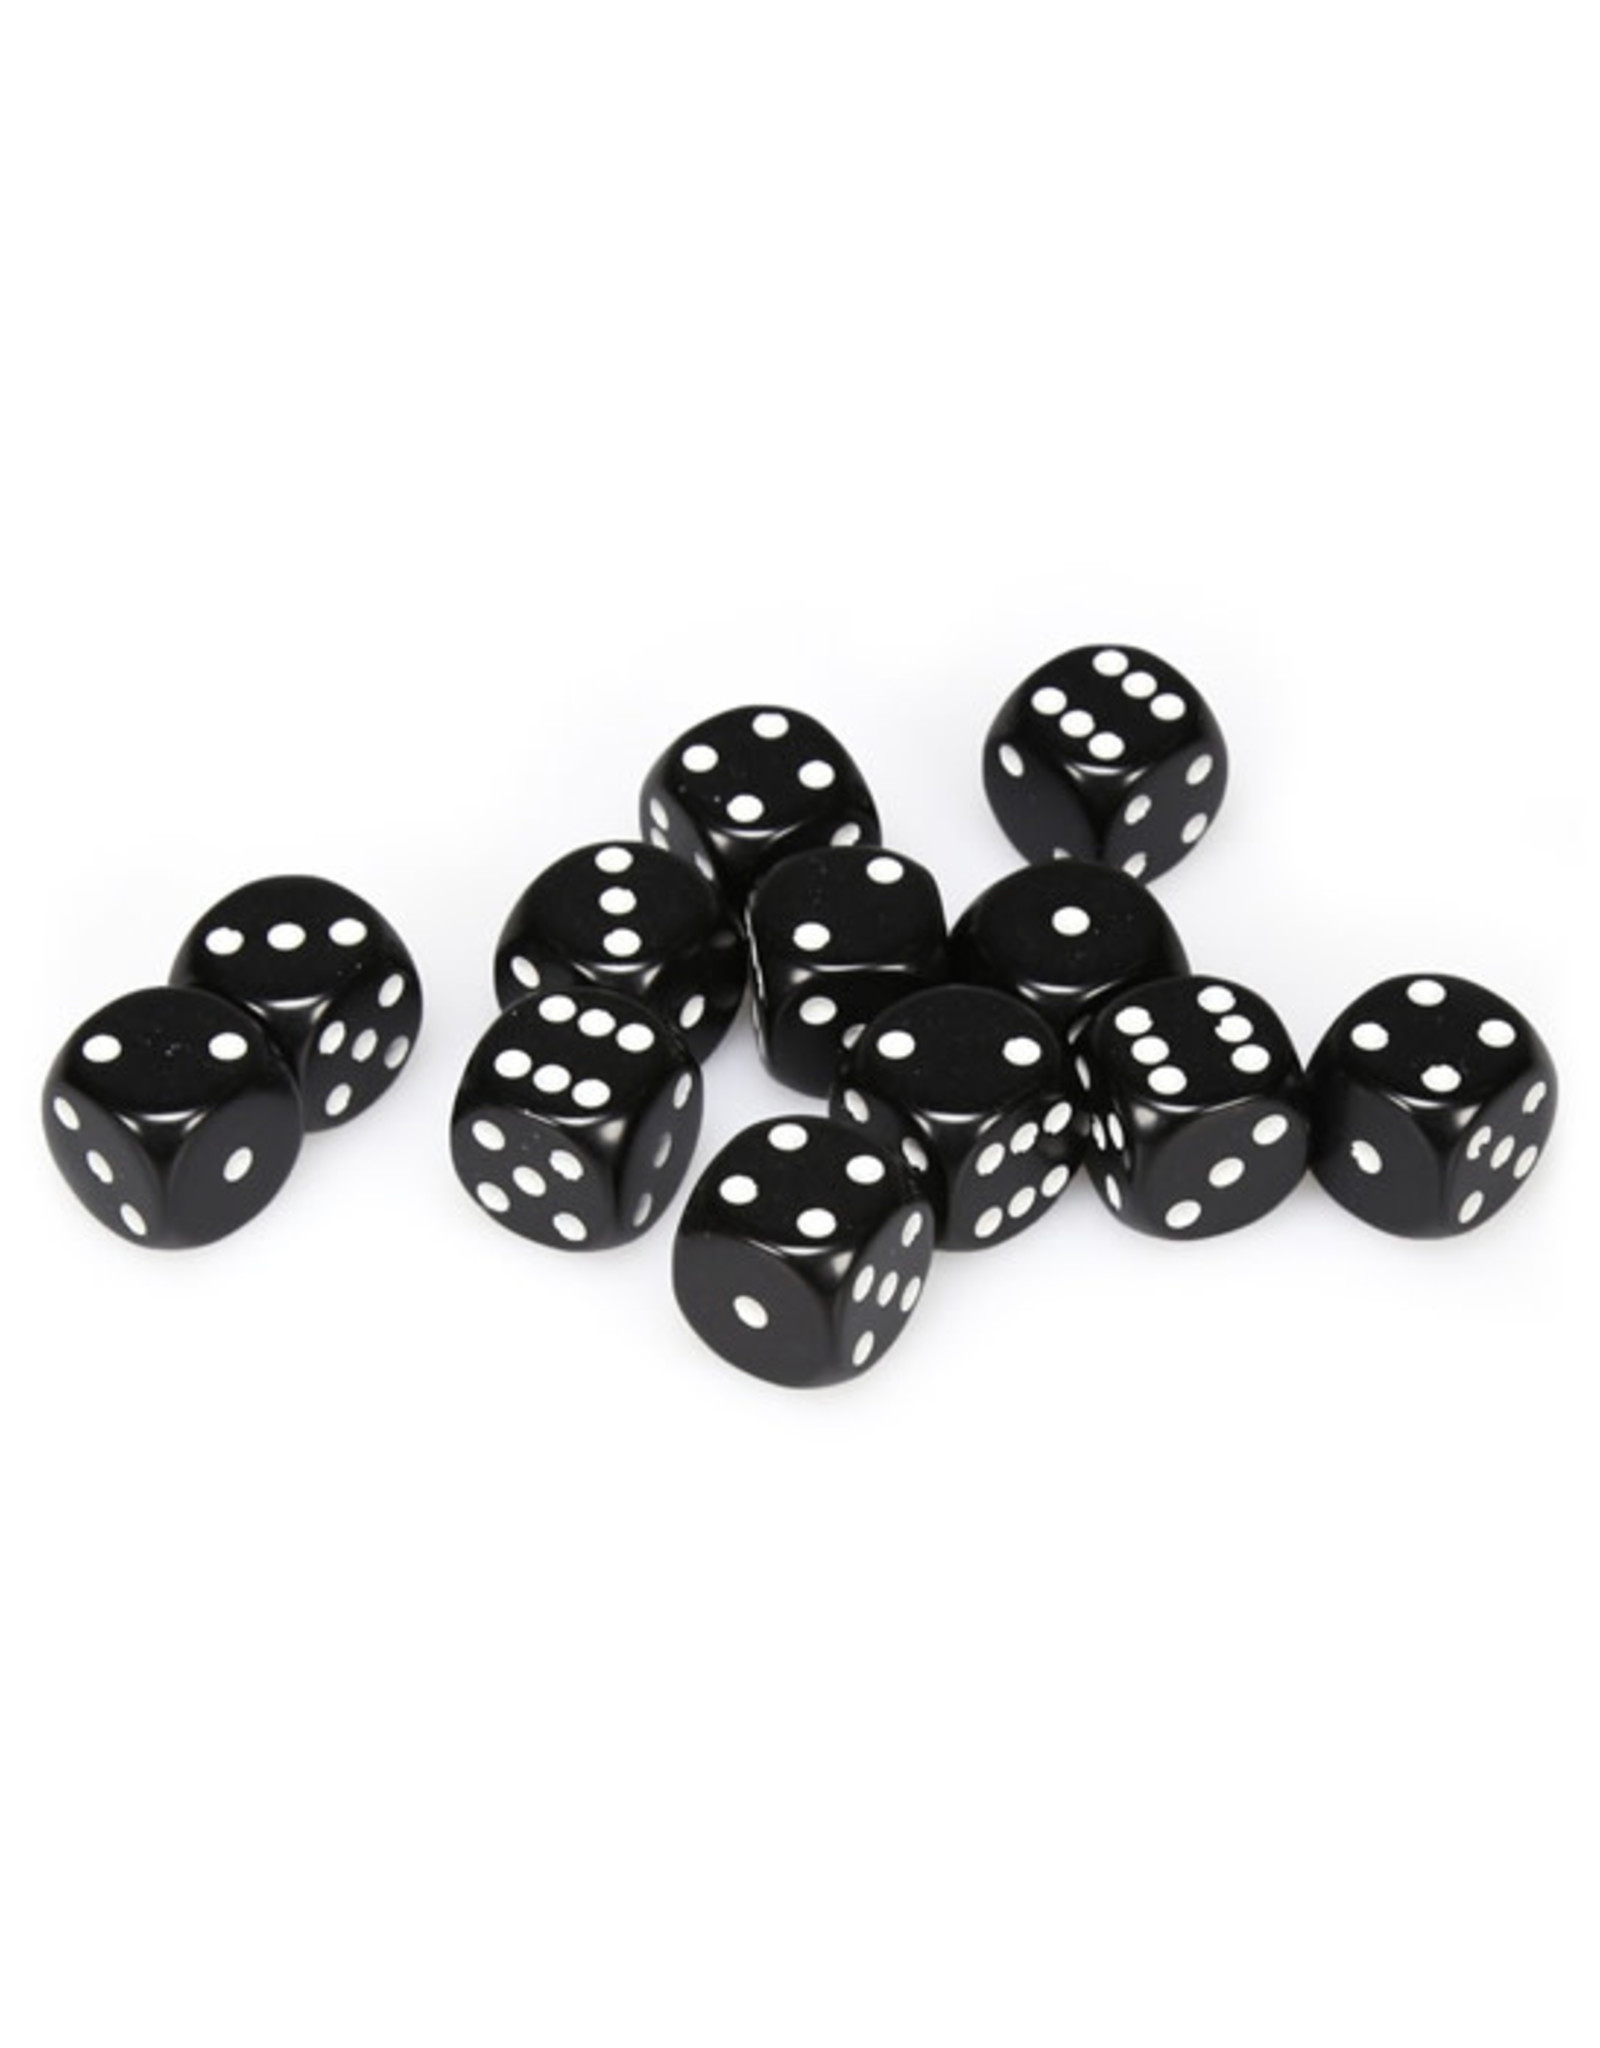 Chessex Chessex: 16mm D6 - Opaque - Black w/ White